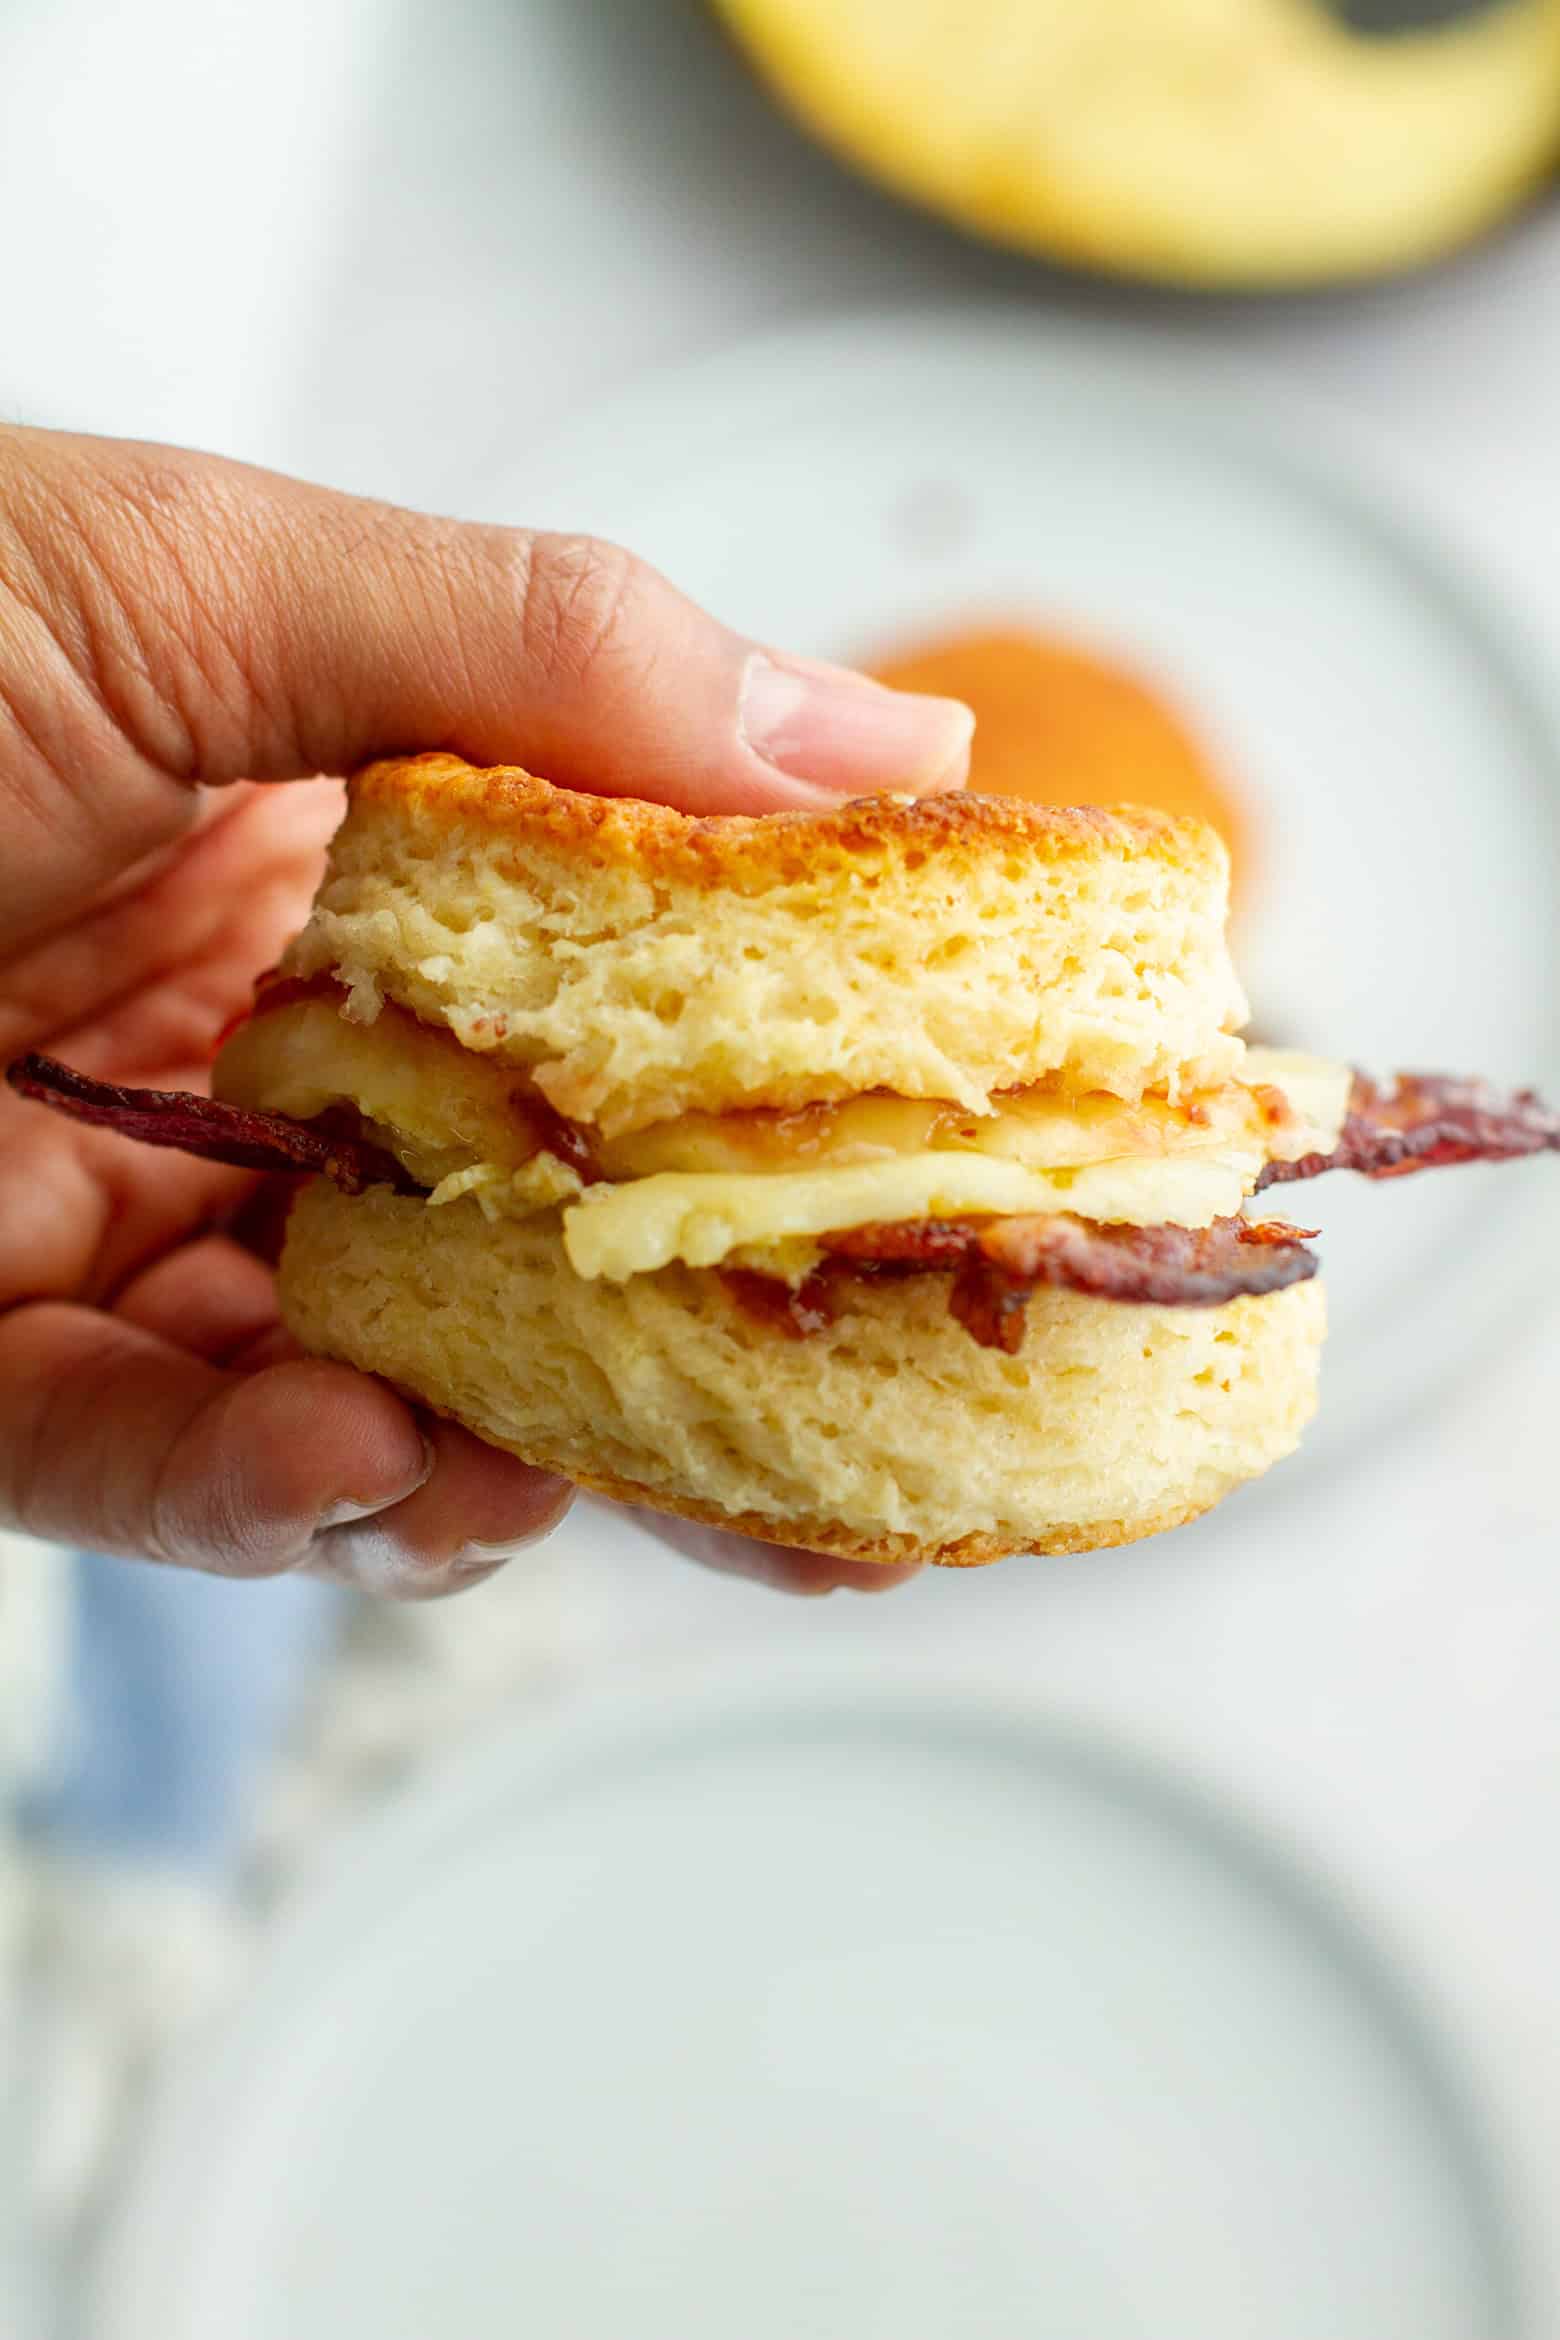 bacon egg and cheese biscuit beginning held in a hand.